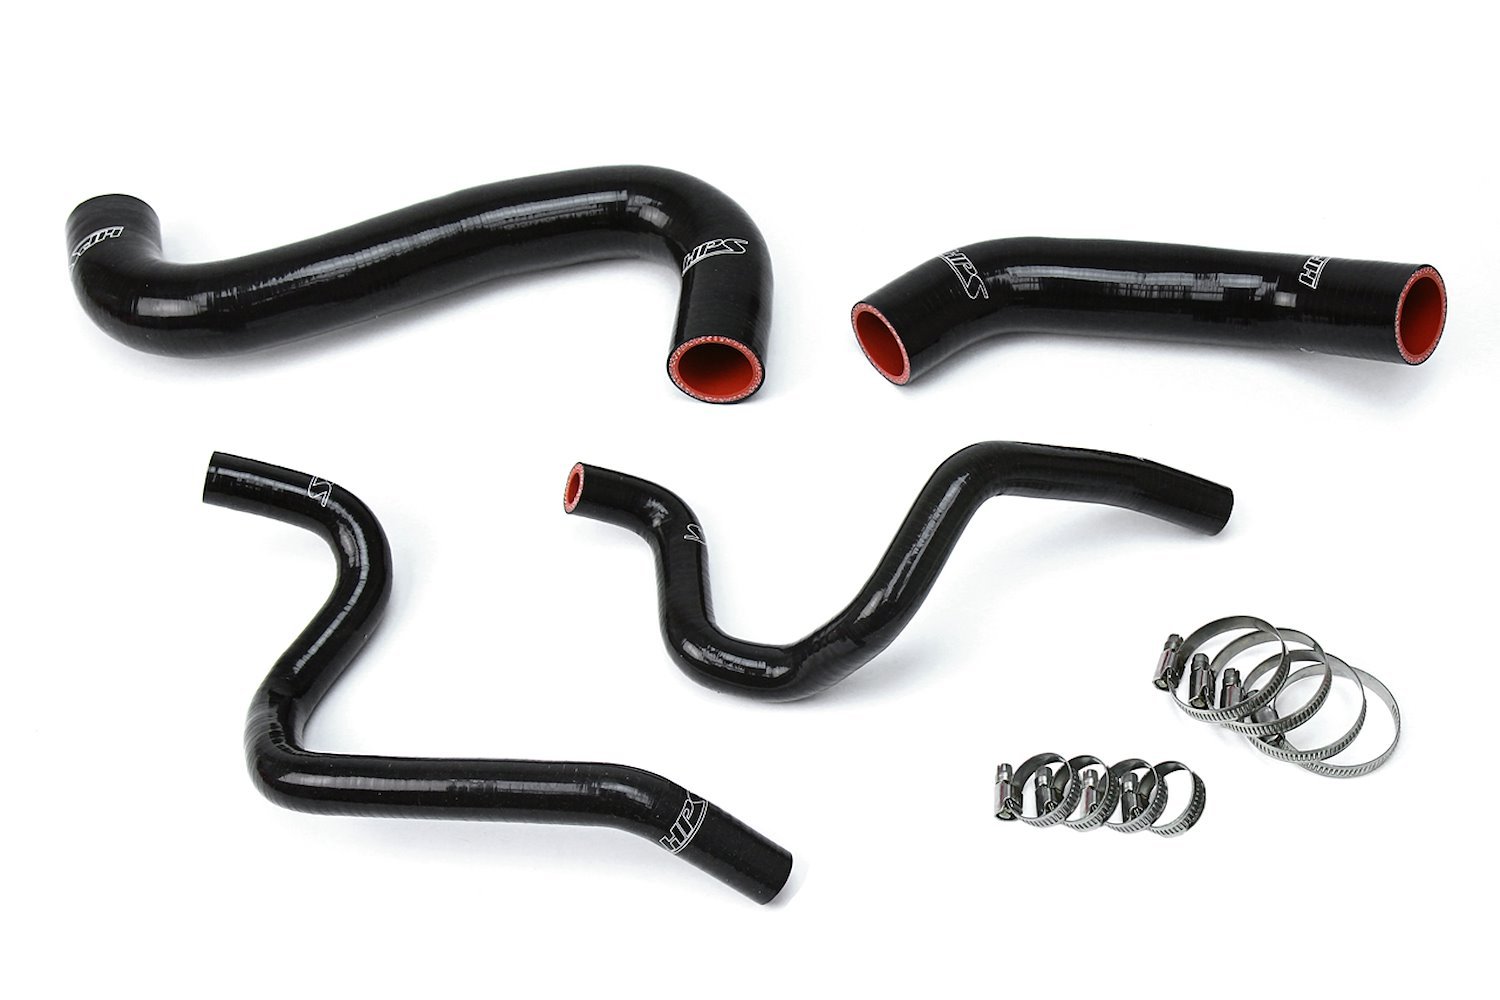 57-1731-BLK Coolant Hose Kit, High-Temp 3-Ply Reinforced Silicone, Replace Rubber Radiator Heater Coolant Hoses